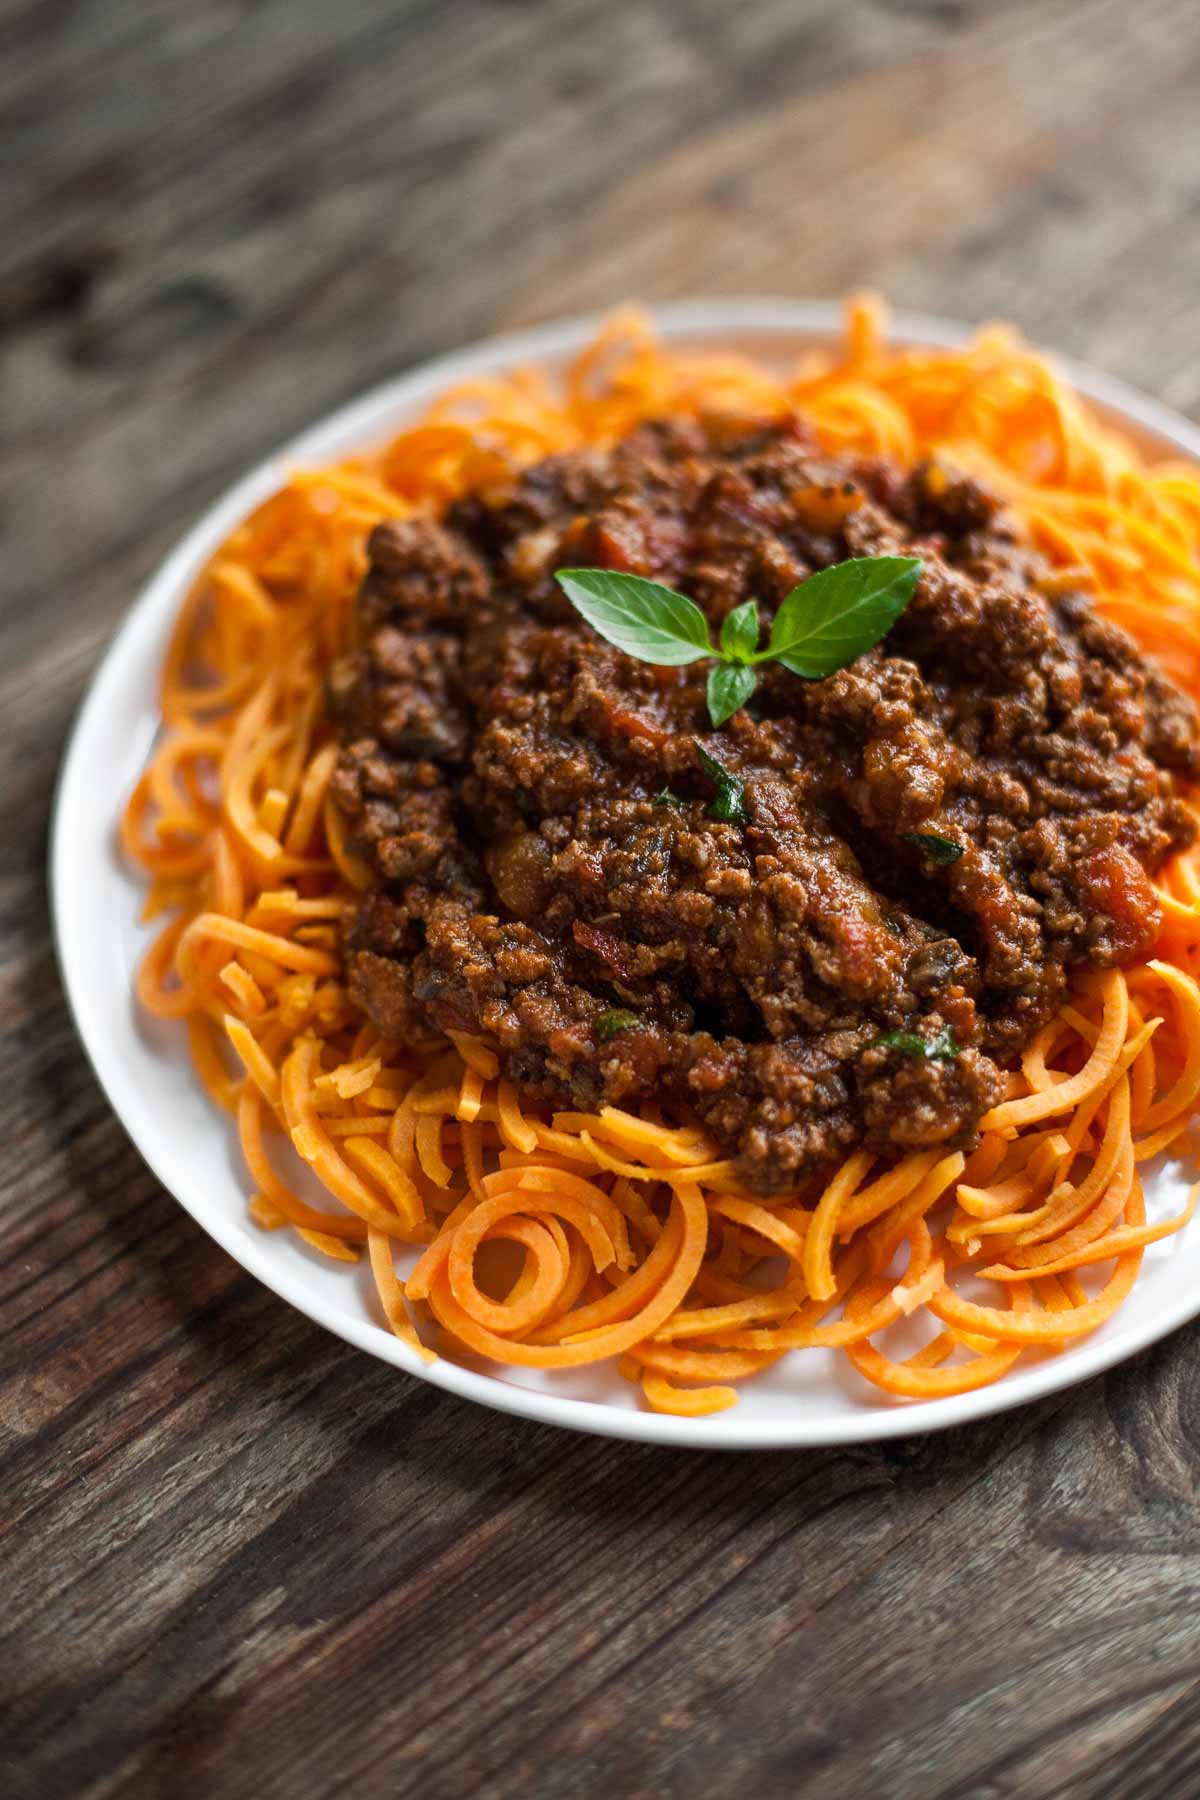 Top 15 Paleo Recipes of 2015--Slow-Cooked Bolognese Sauce with Sweet Potato Spaghetti (Whole30) | acalculatedwhisk.com